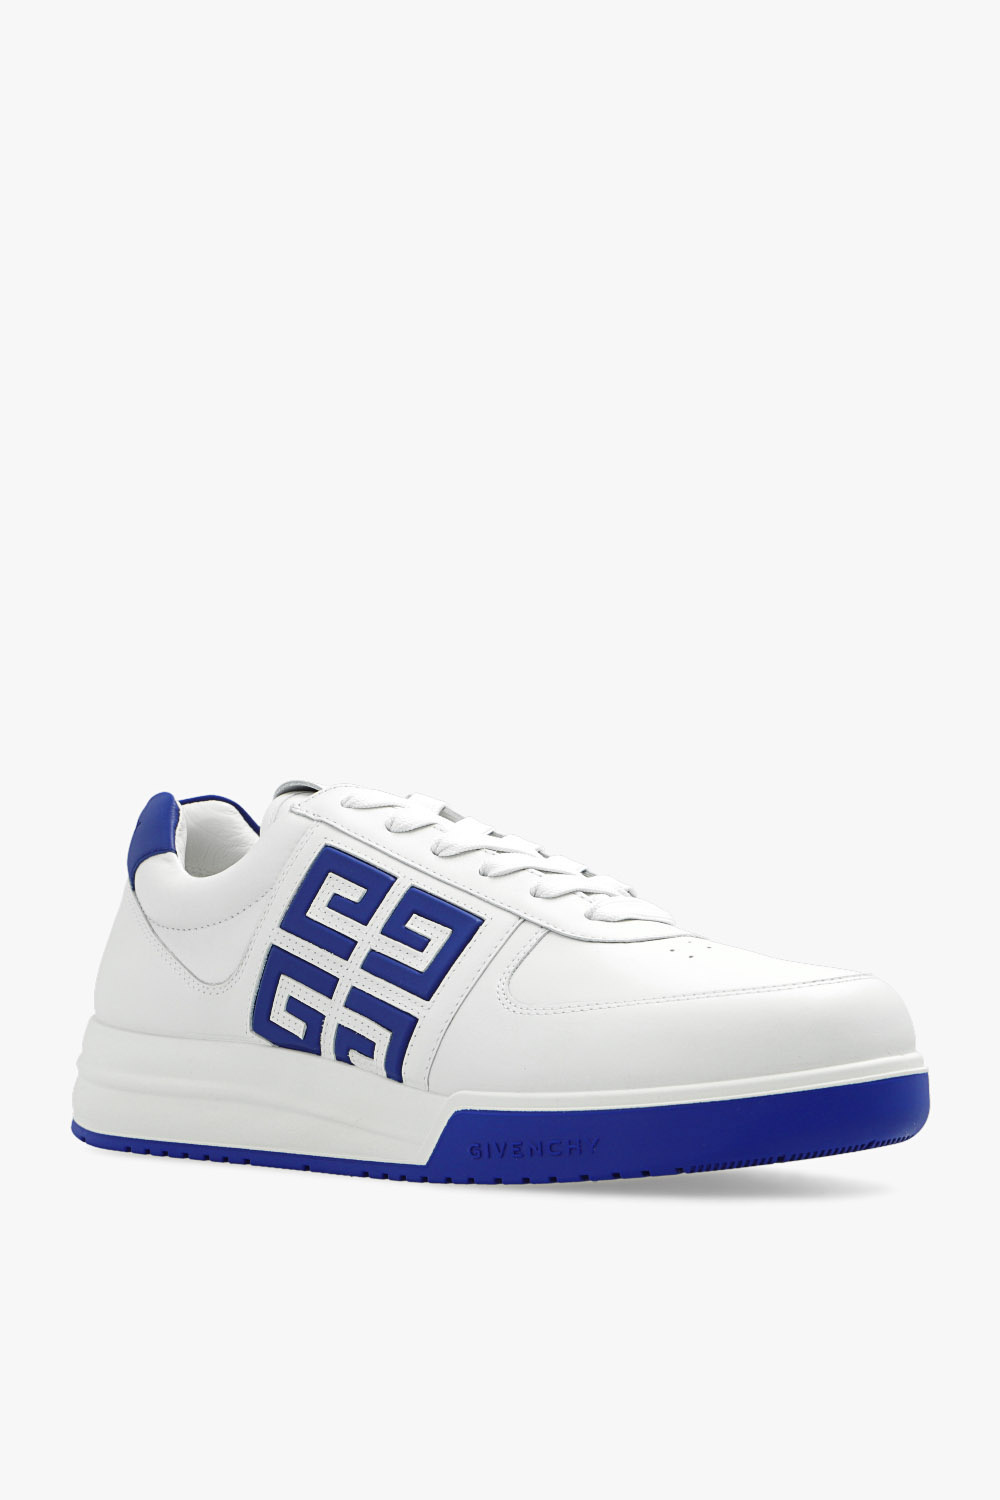 givenchy Men ‘G4’ sneakers